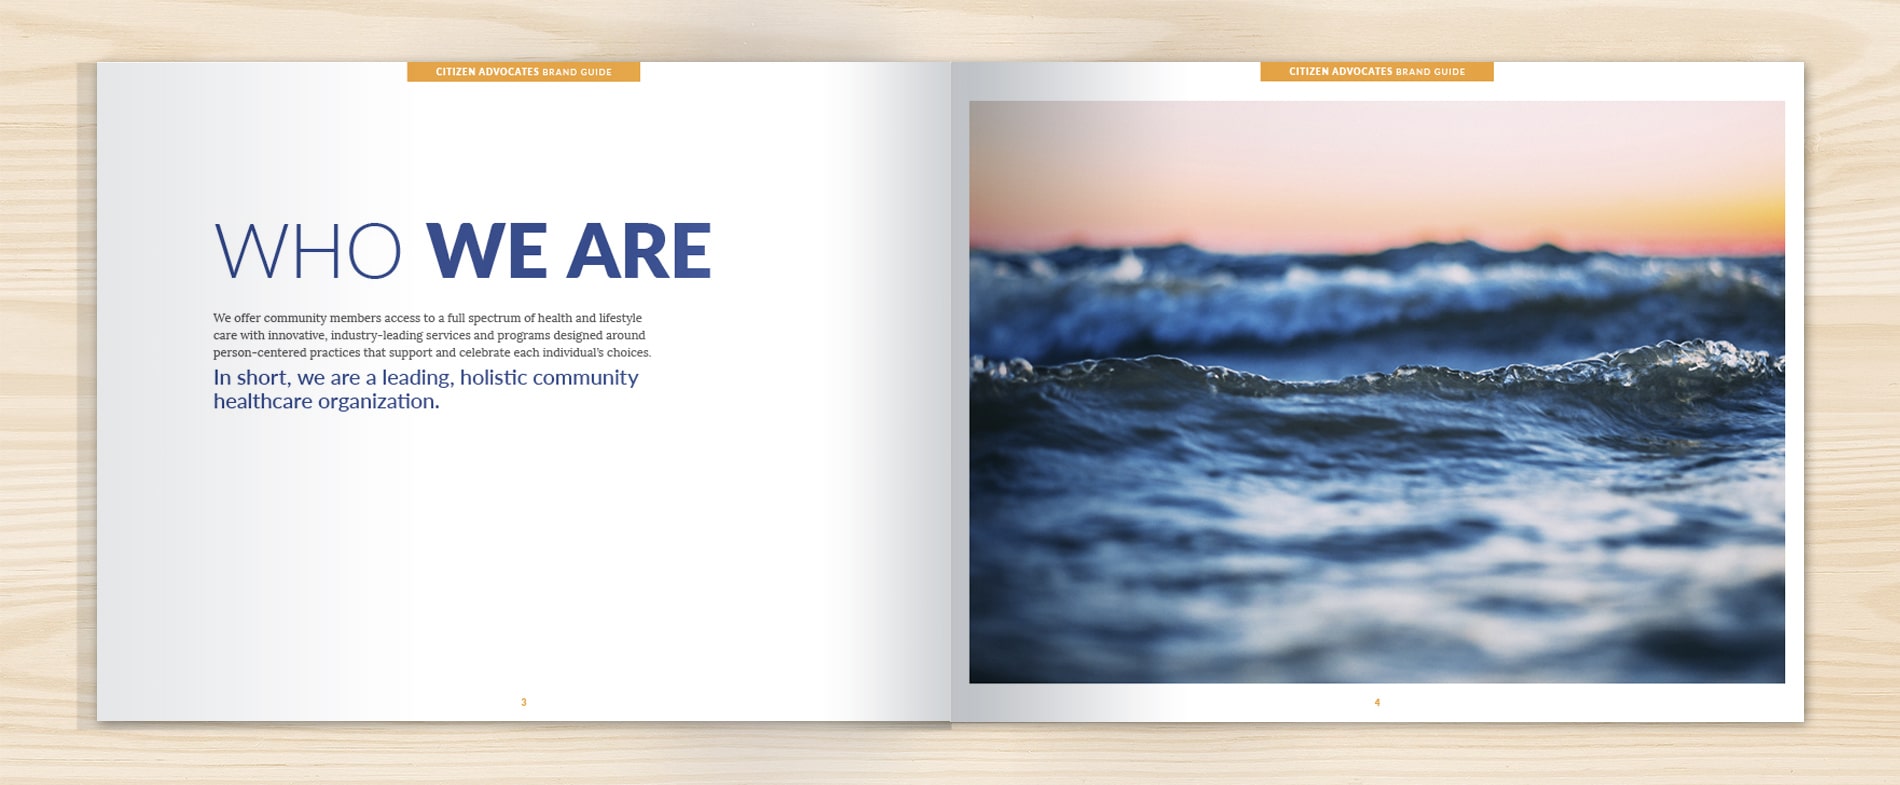 Brand identity book design for mental healthcare services client